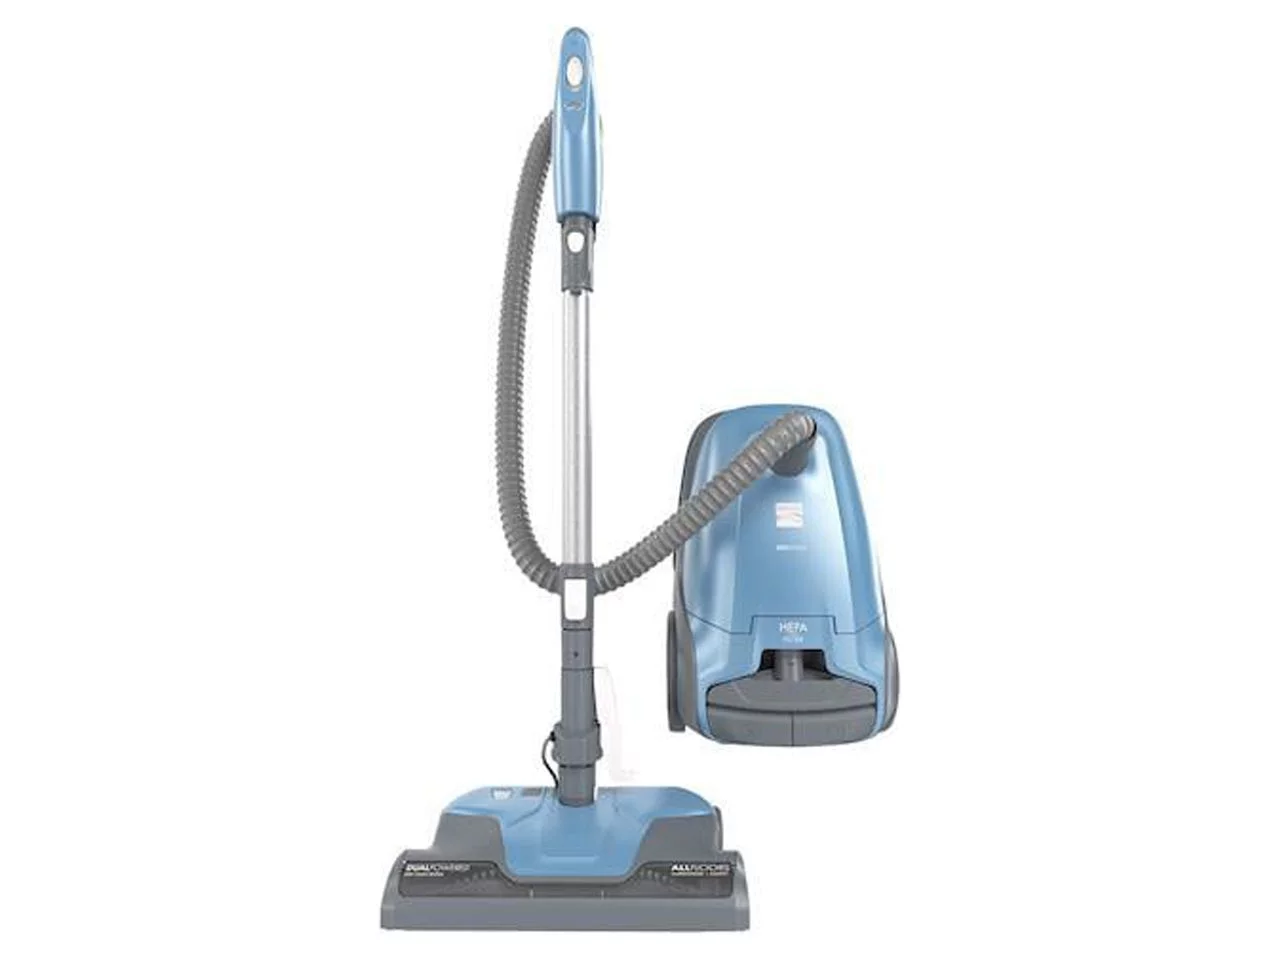 Kenmore 200 Series Corded Canister Vacuum Cleaner Bagged Blue (BC4002)